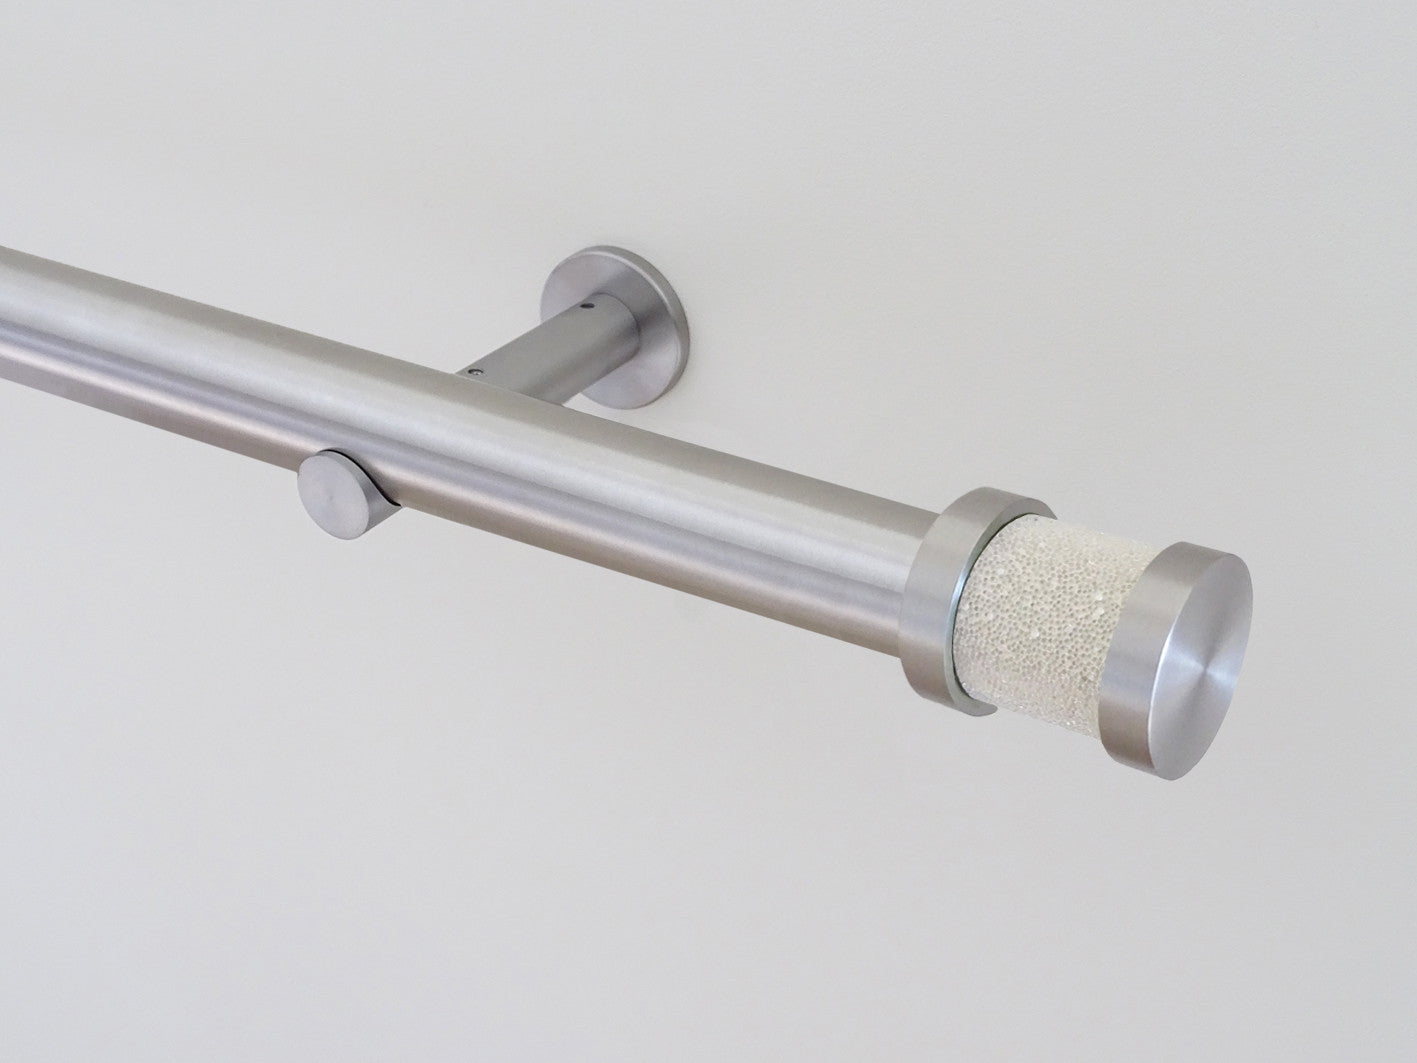 30mm diameter stainless steel curtain pole collection with champagne Groove finials